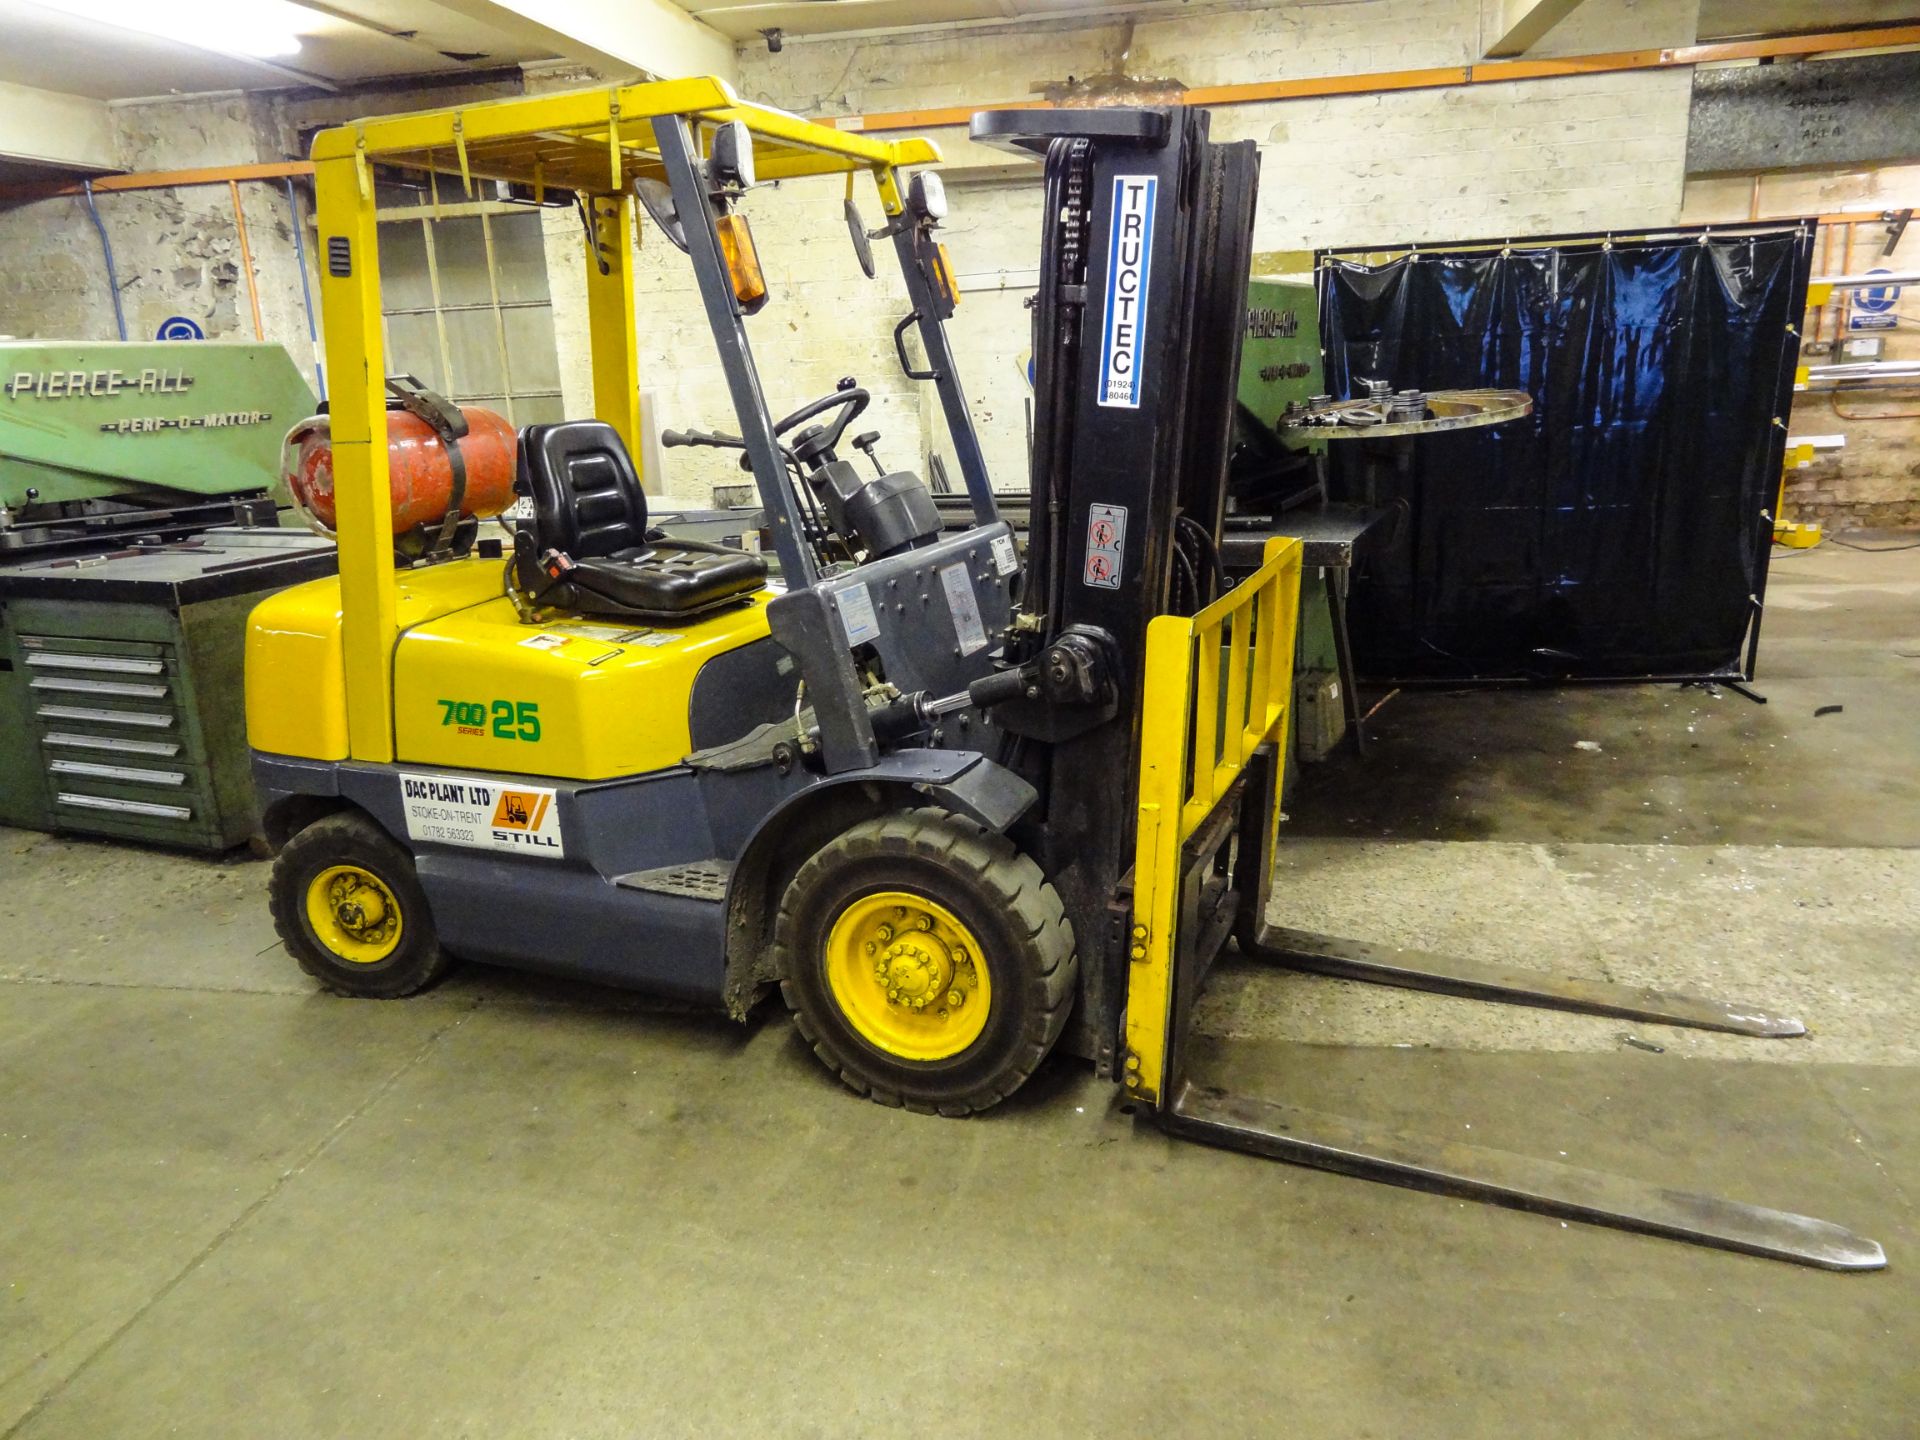 TCM SERIES 700 25 2500kg LPG FORKLIFT TRUCK, year of manufacture 1998, indicated hours 2171 (at time - Bild 2 aus 2